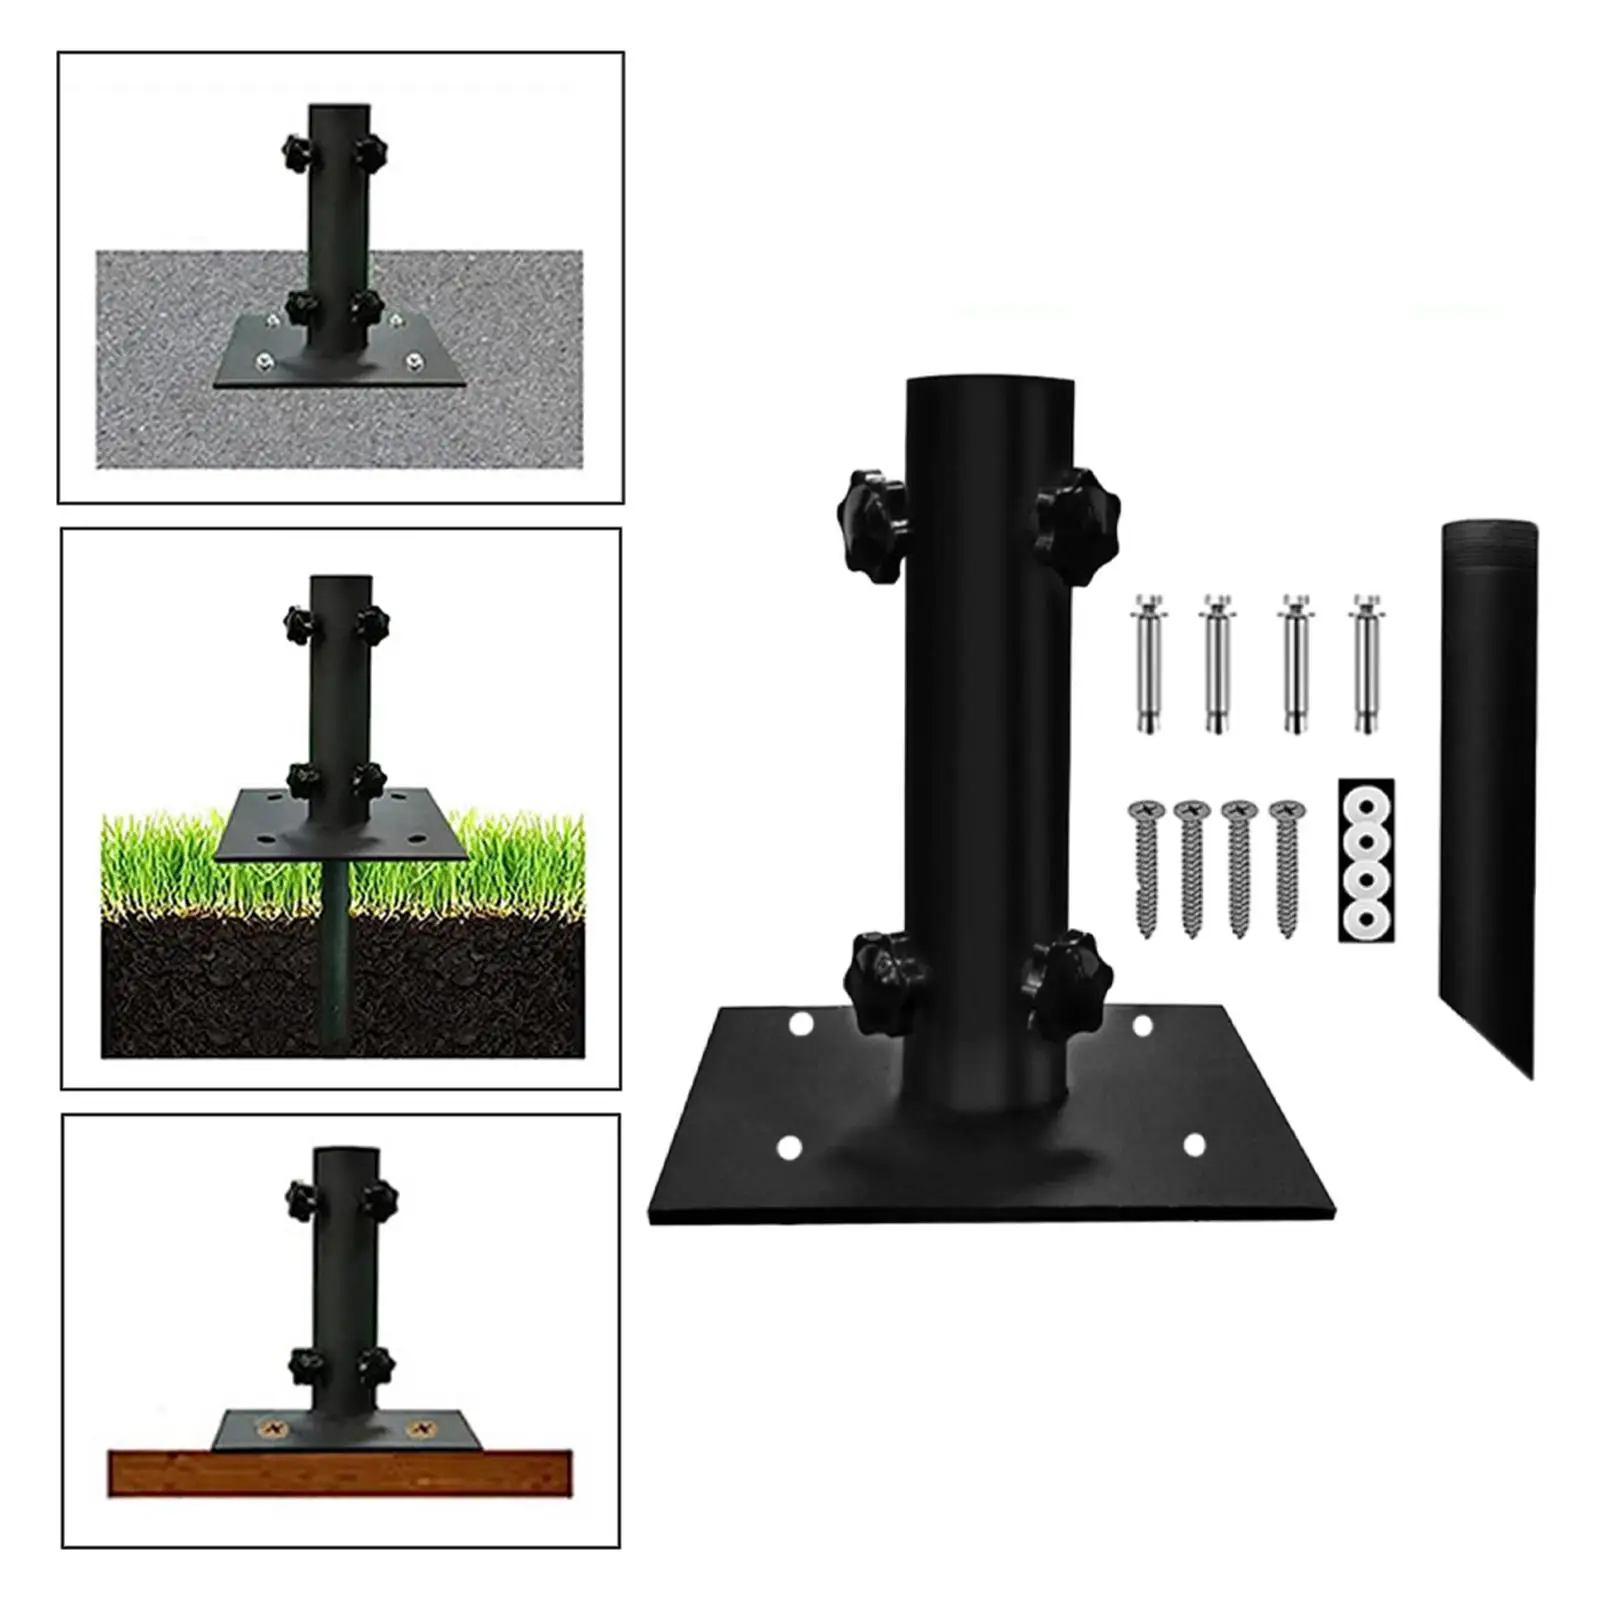 Outdoor Umbrella Base Stand Weather Resistance Hardware Flagpole Brackets for Courtyard Decks Docks Patios Picnic Tables